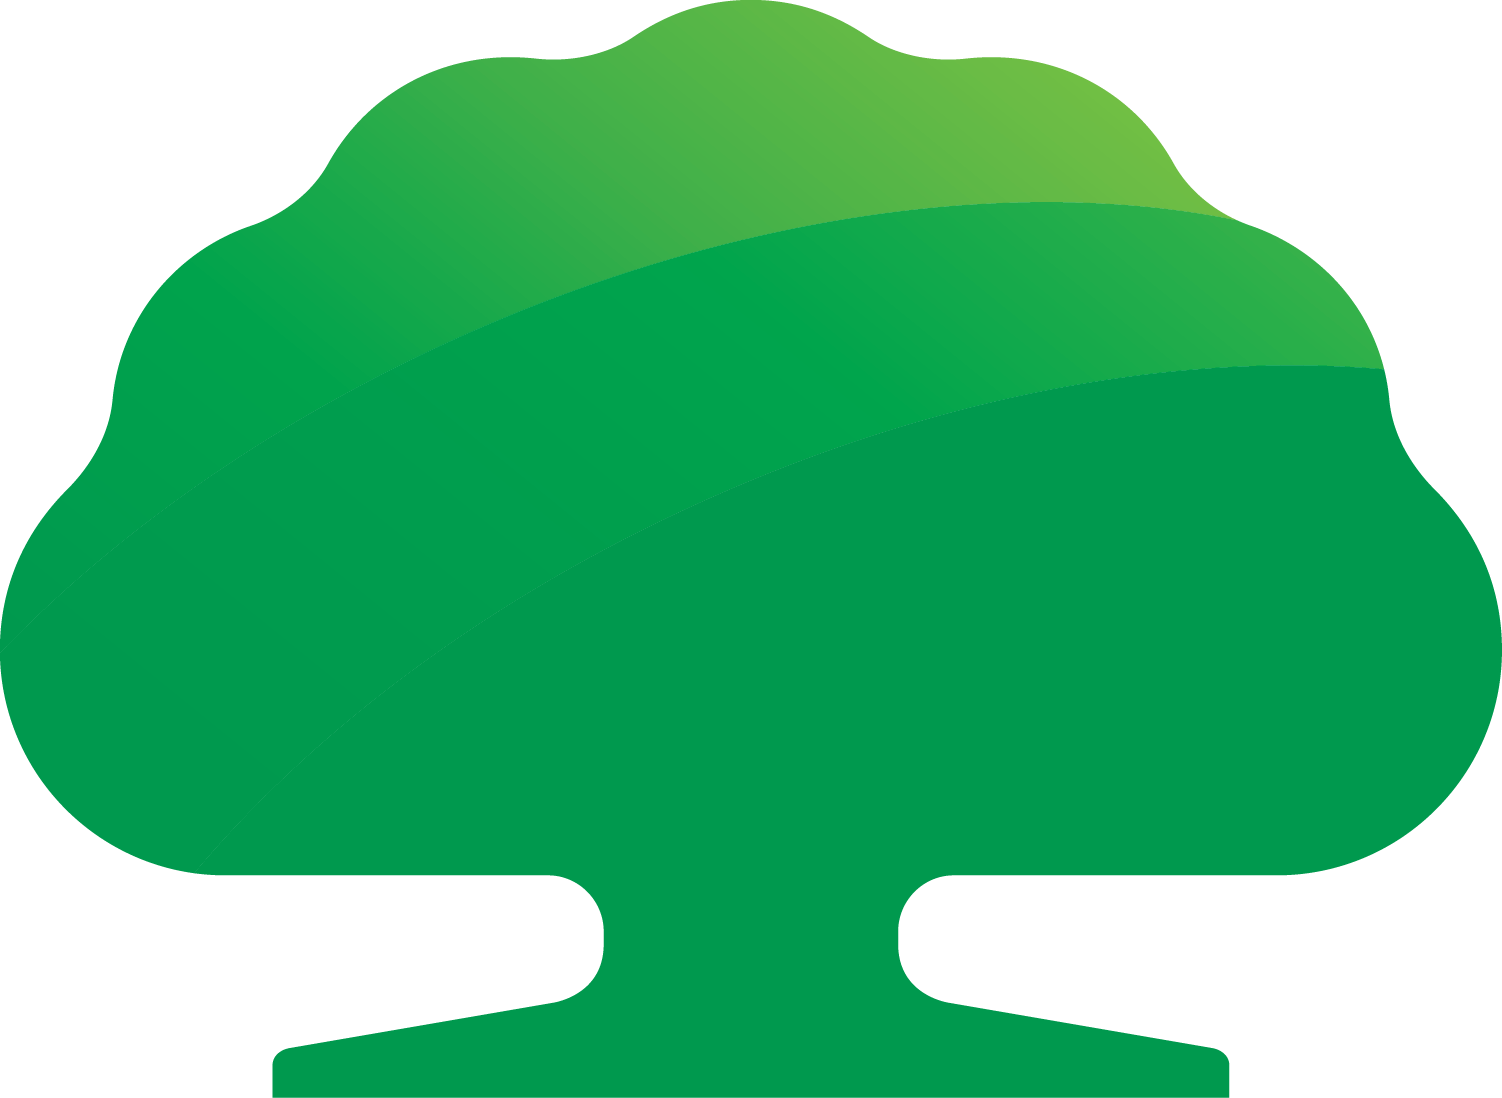 Cathay Financial Holding logo (transparent PNG)